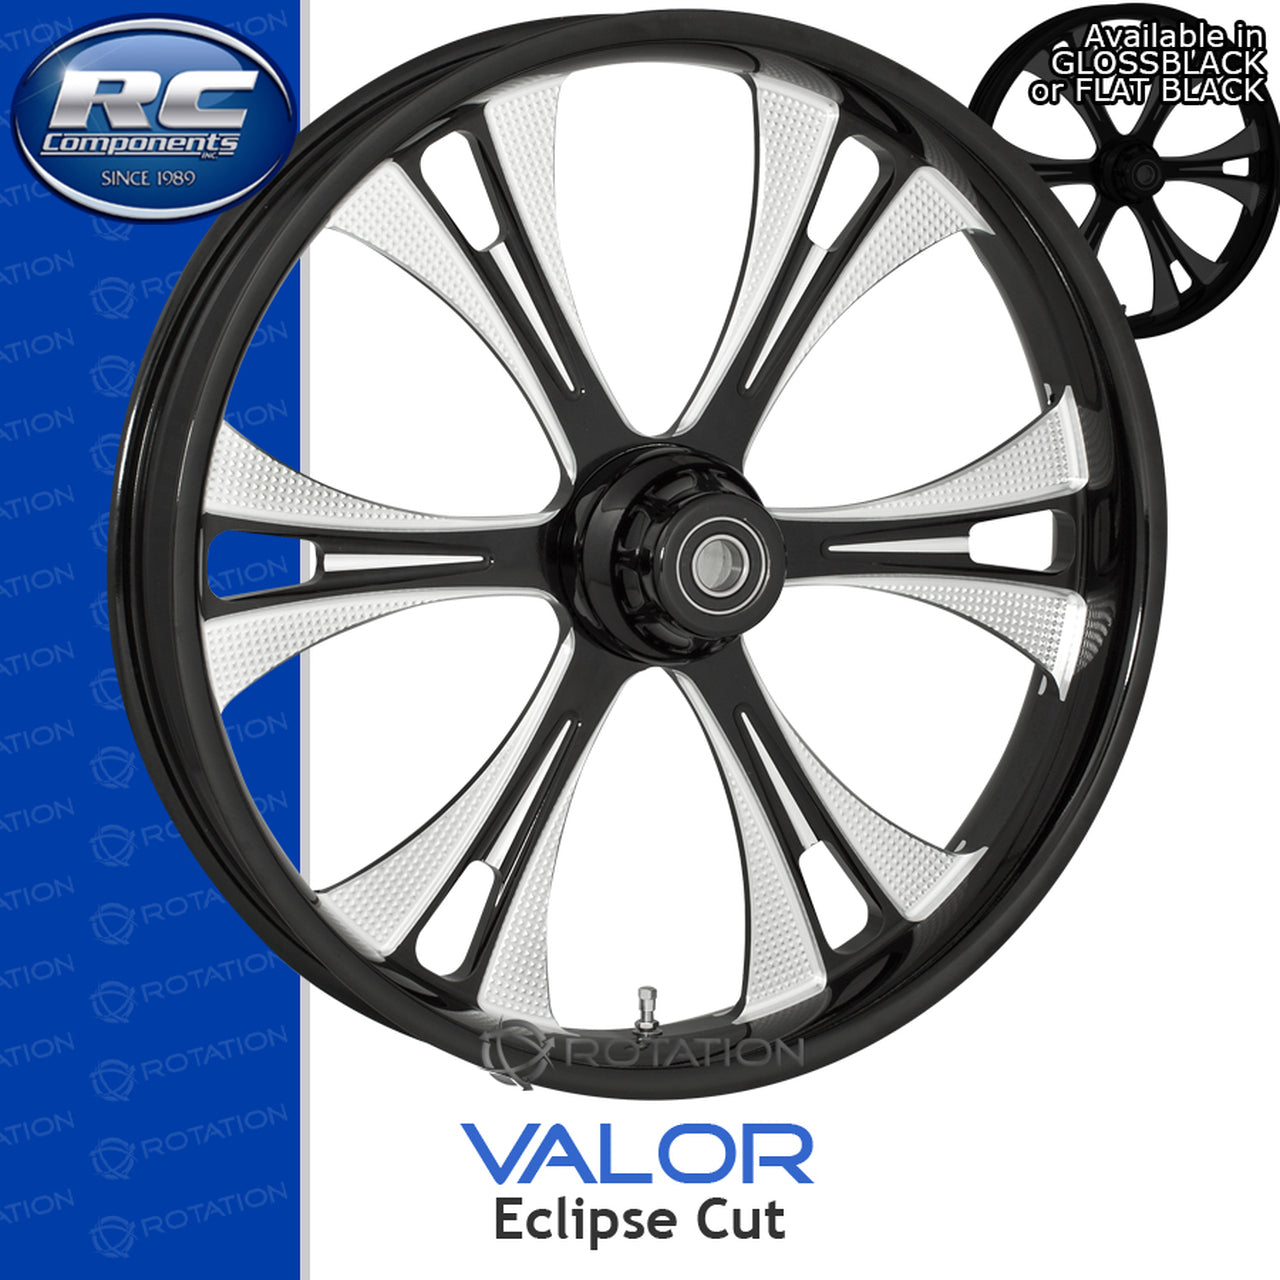 RC Components Valor Eclipse Touring Wheel